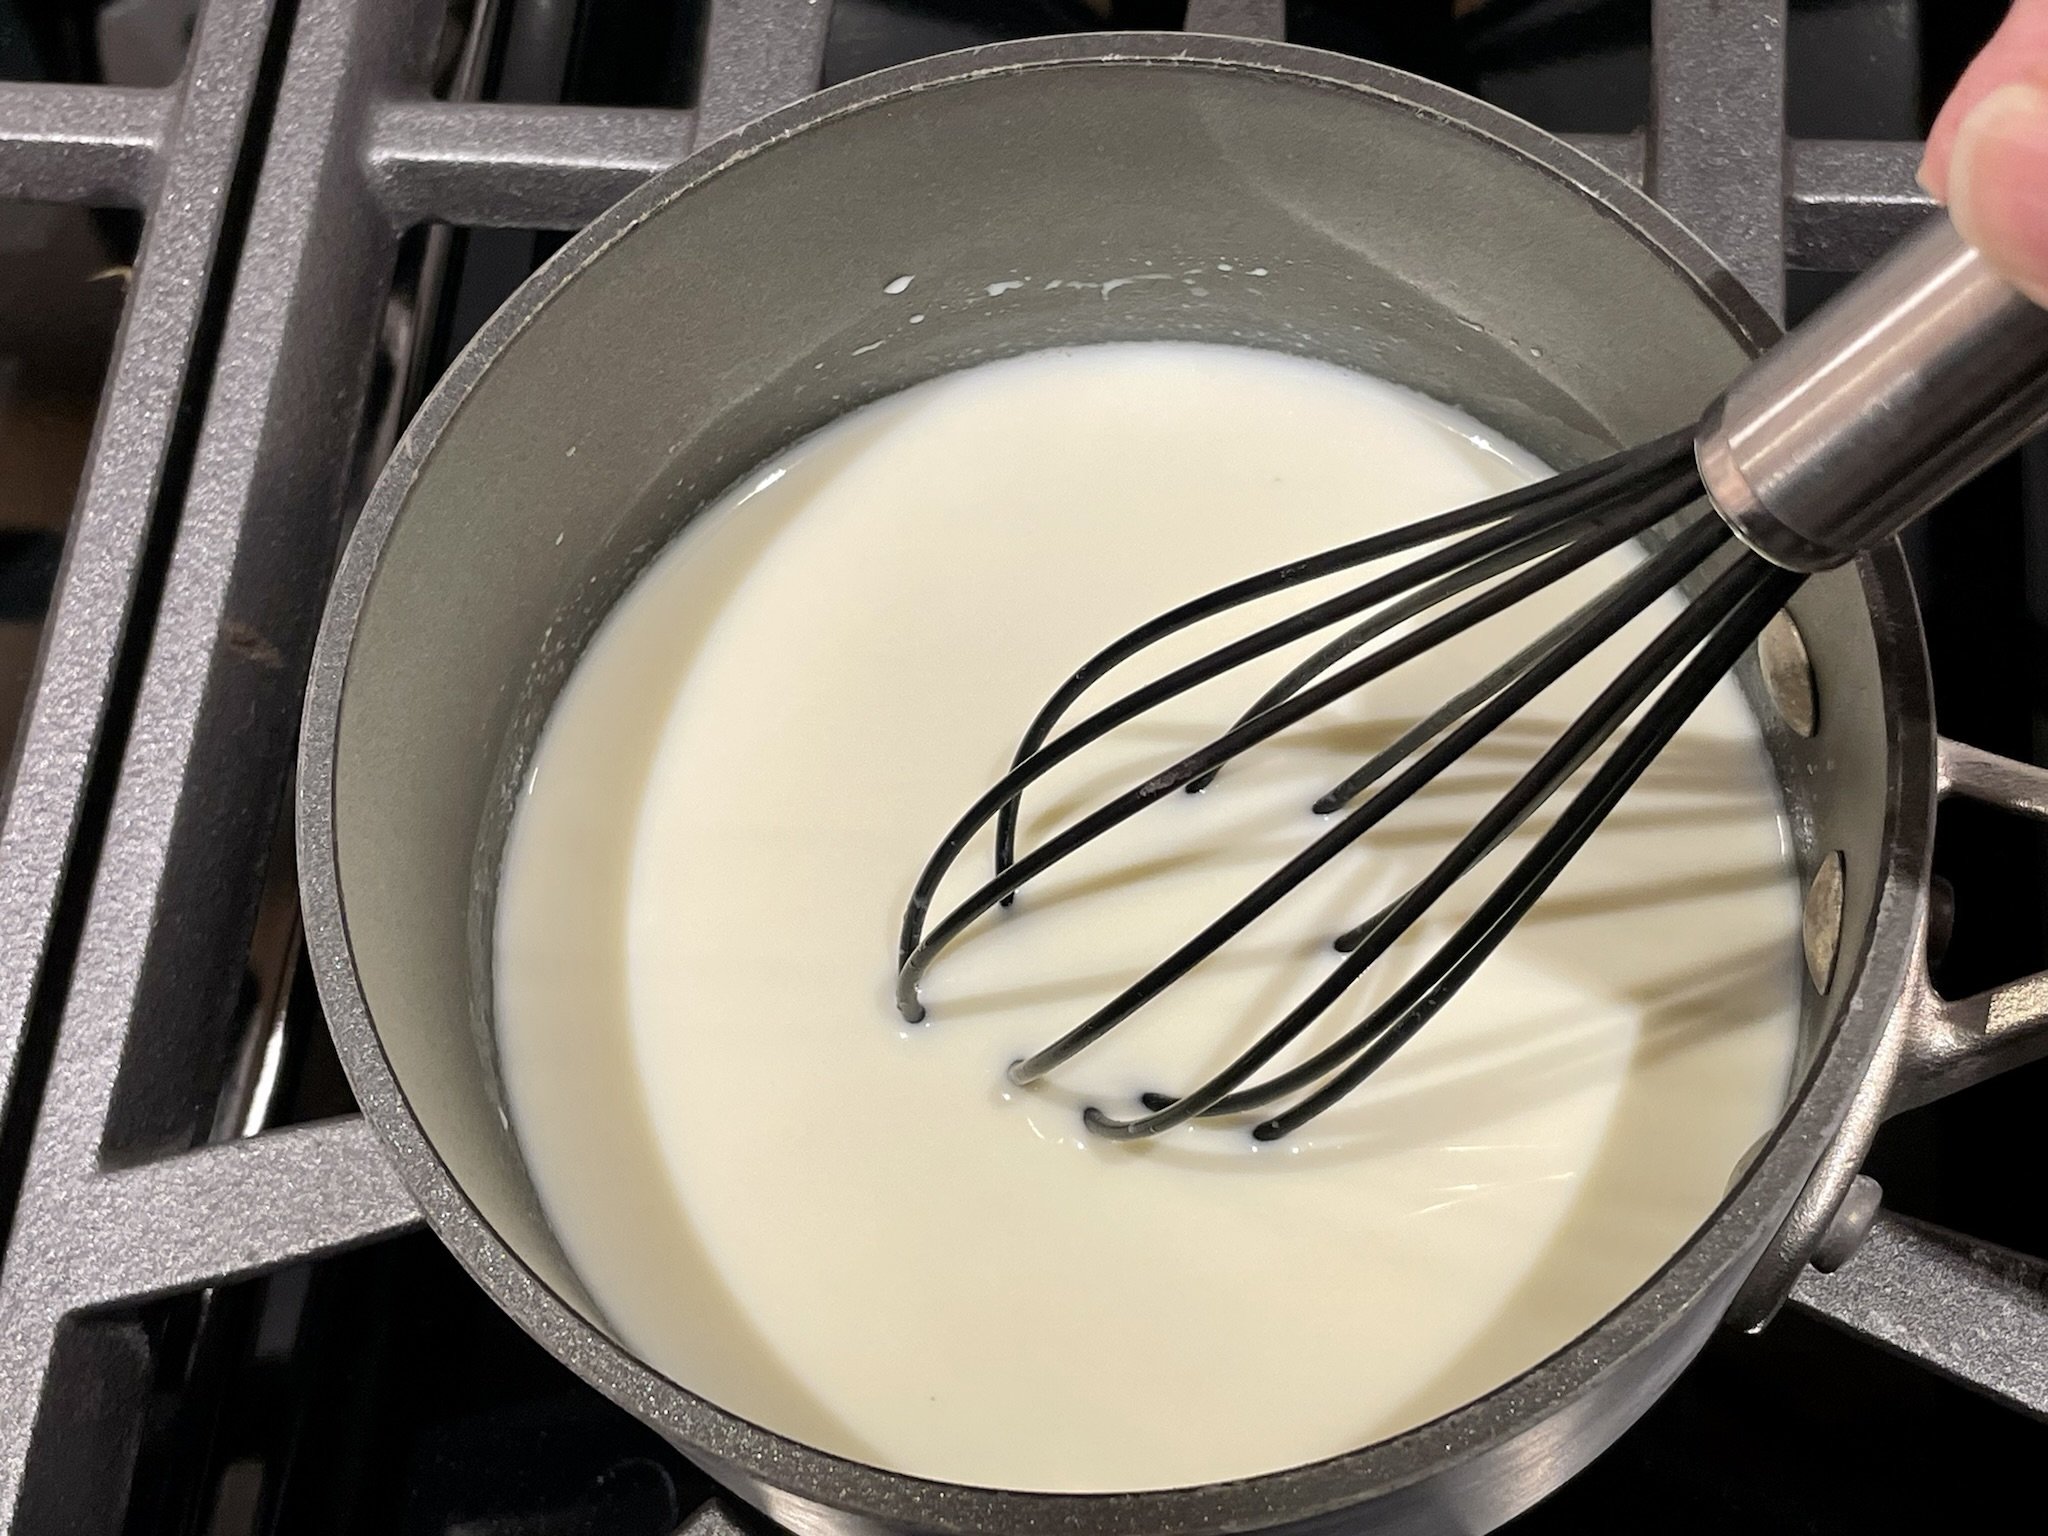 Whisk frequently.